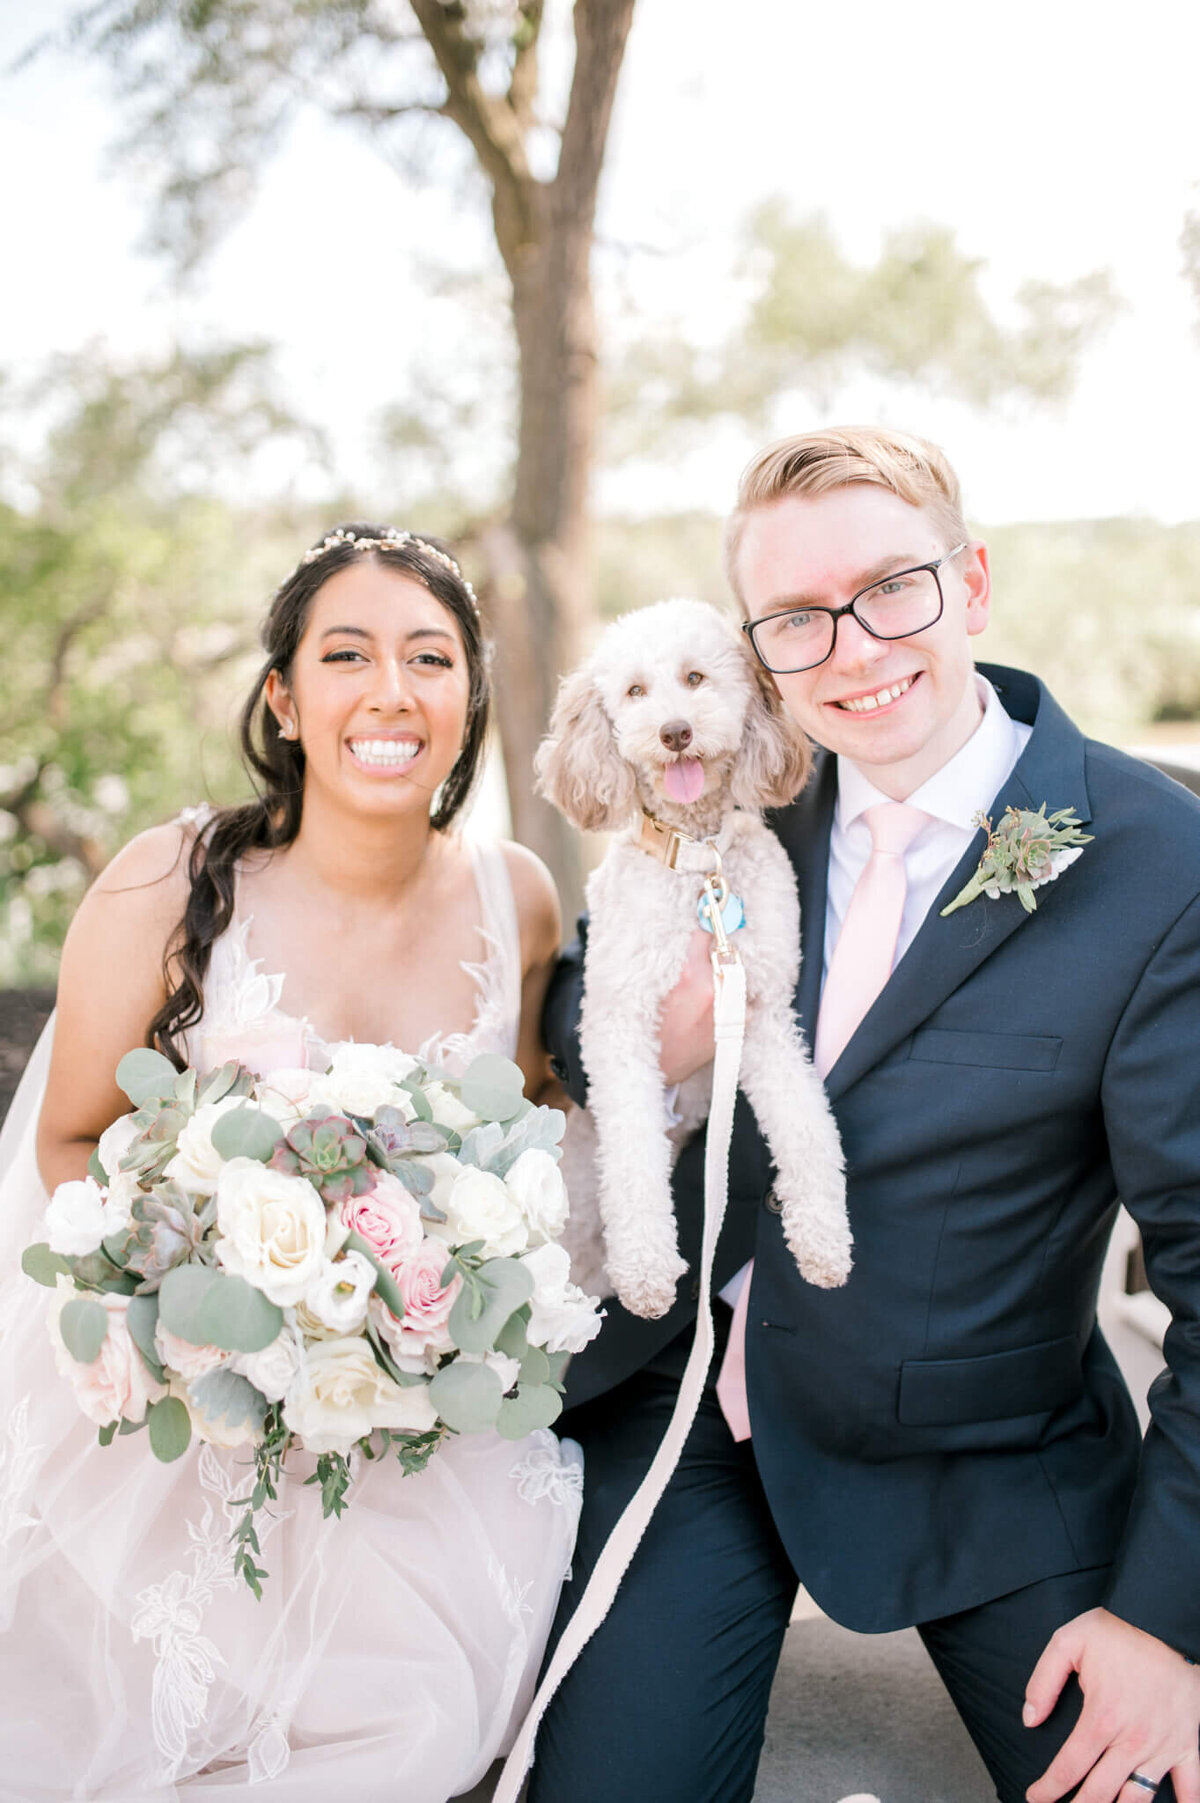 Bride and groom hold their dog who was part of their wedding day